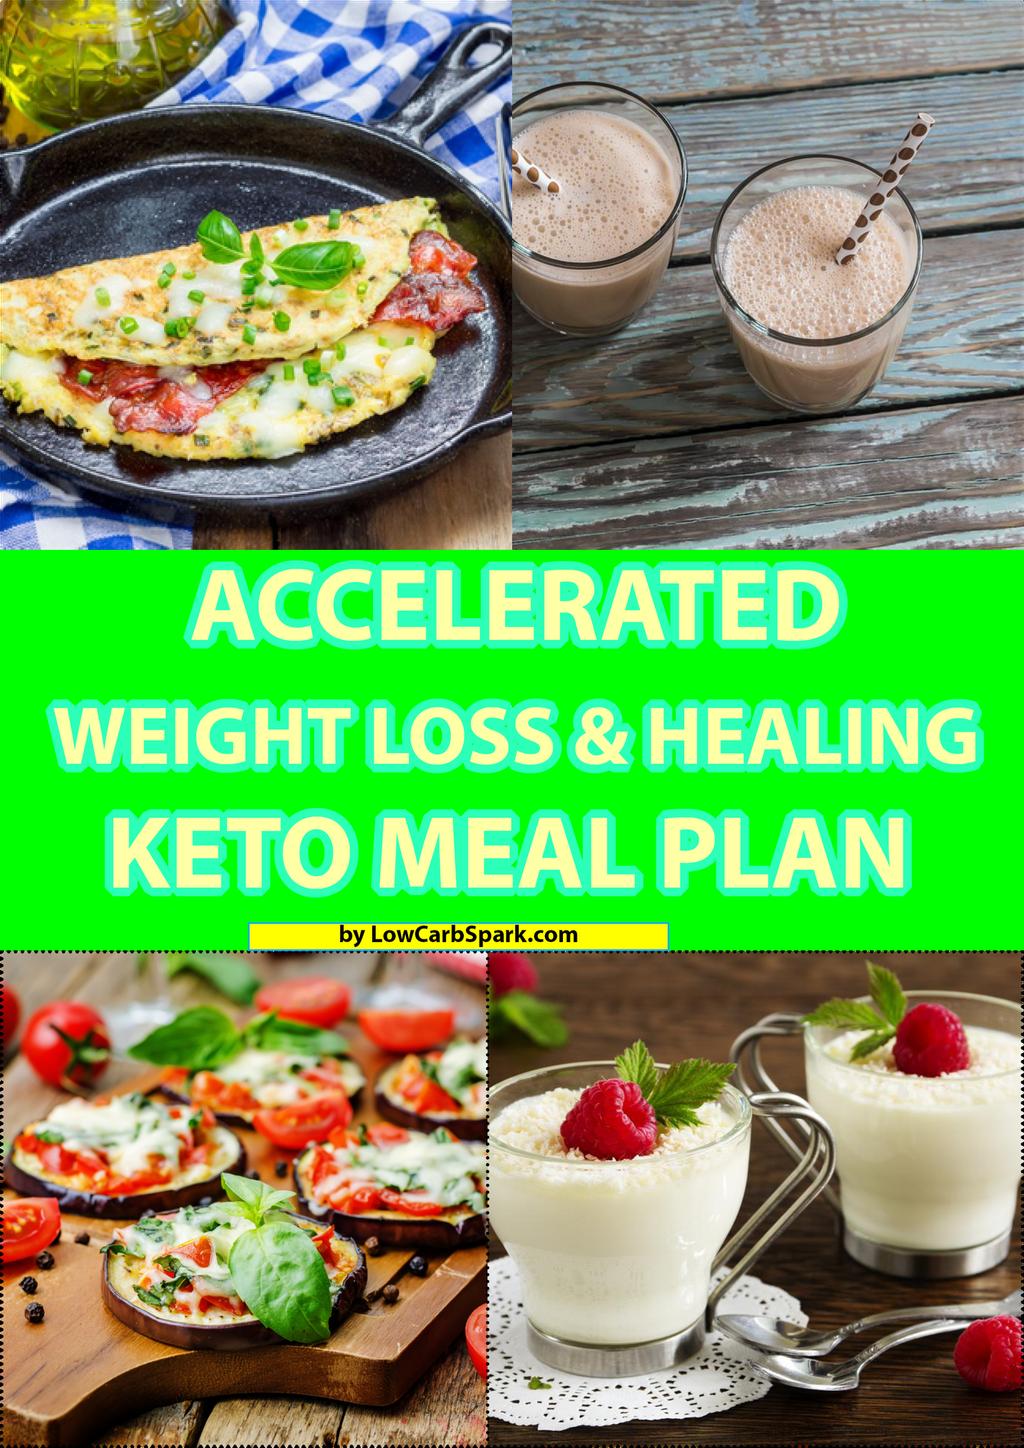 Try my keto meal plan for accelerated fat loss!